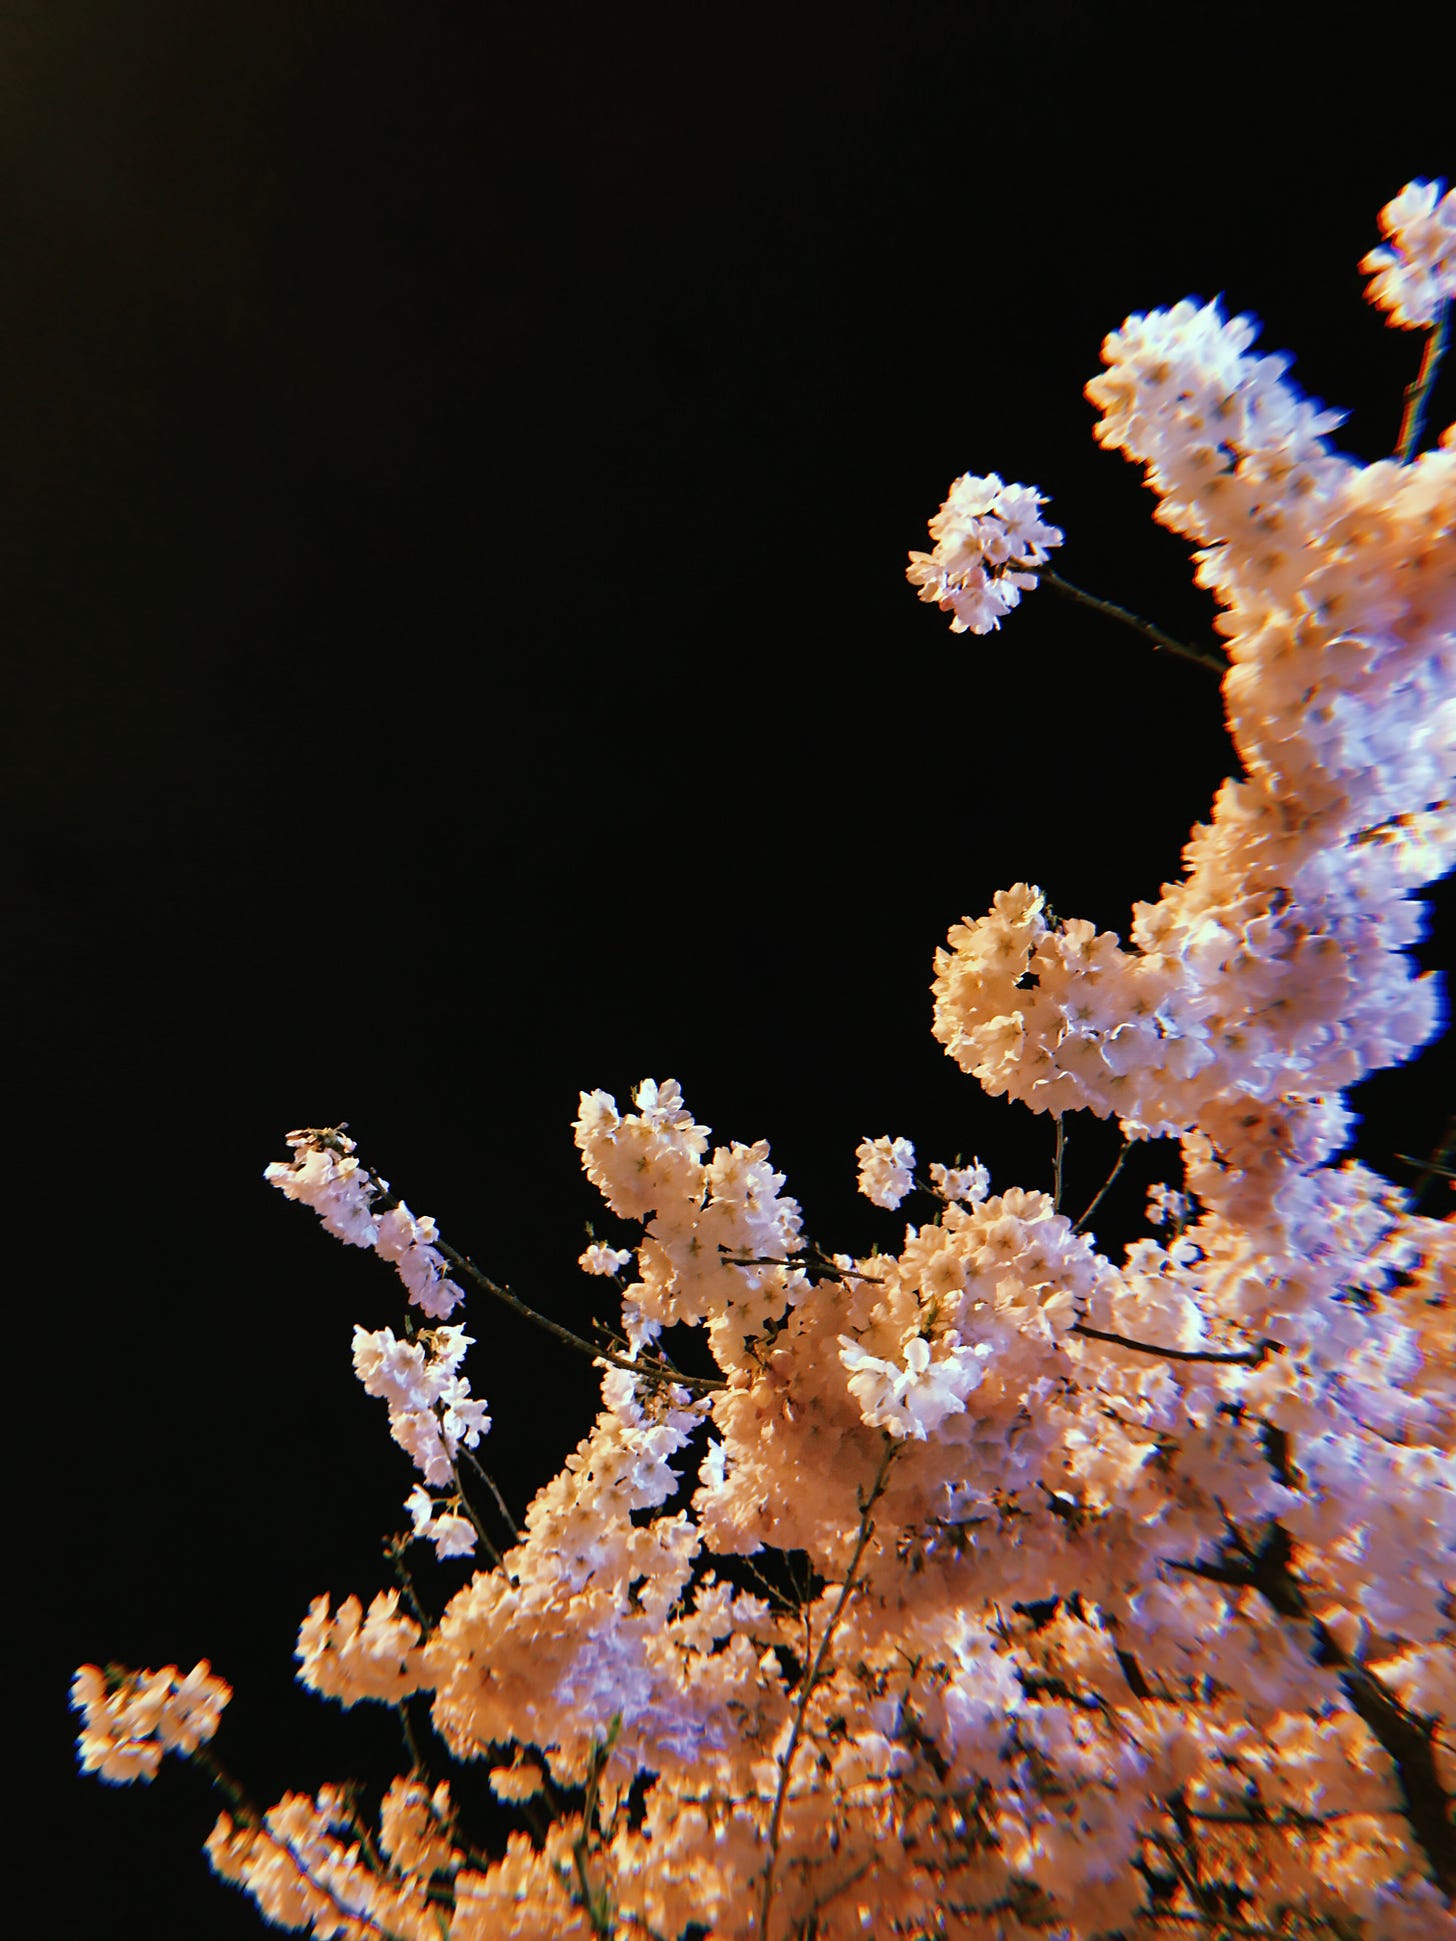 Photograph of a blossoming cherry tree late at night, looking upward through mounds of pinkish white flowers to the black sky above.